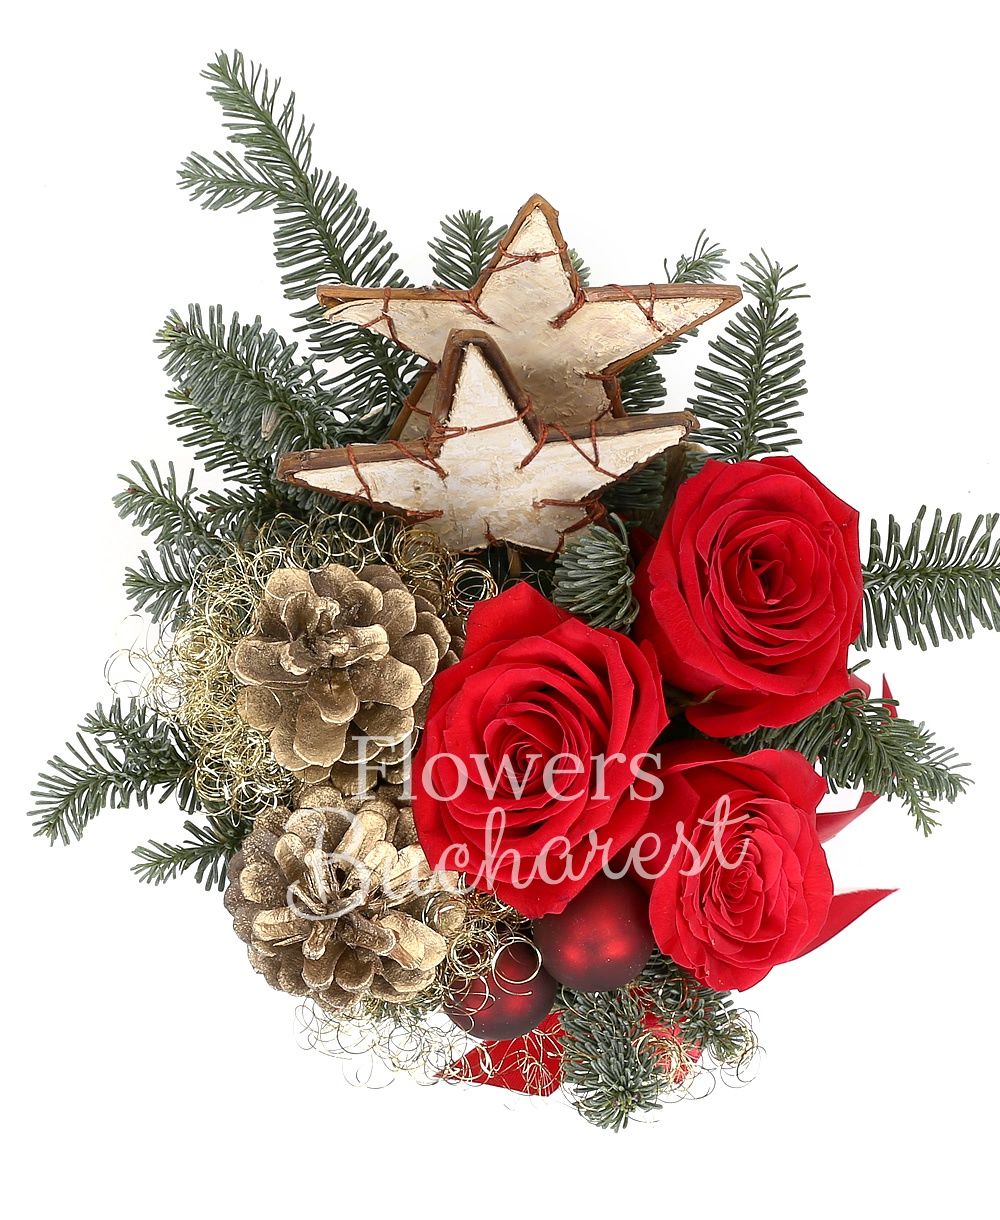 3 red roses, silver fir, christmas decorations, basket